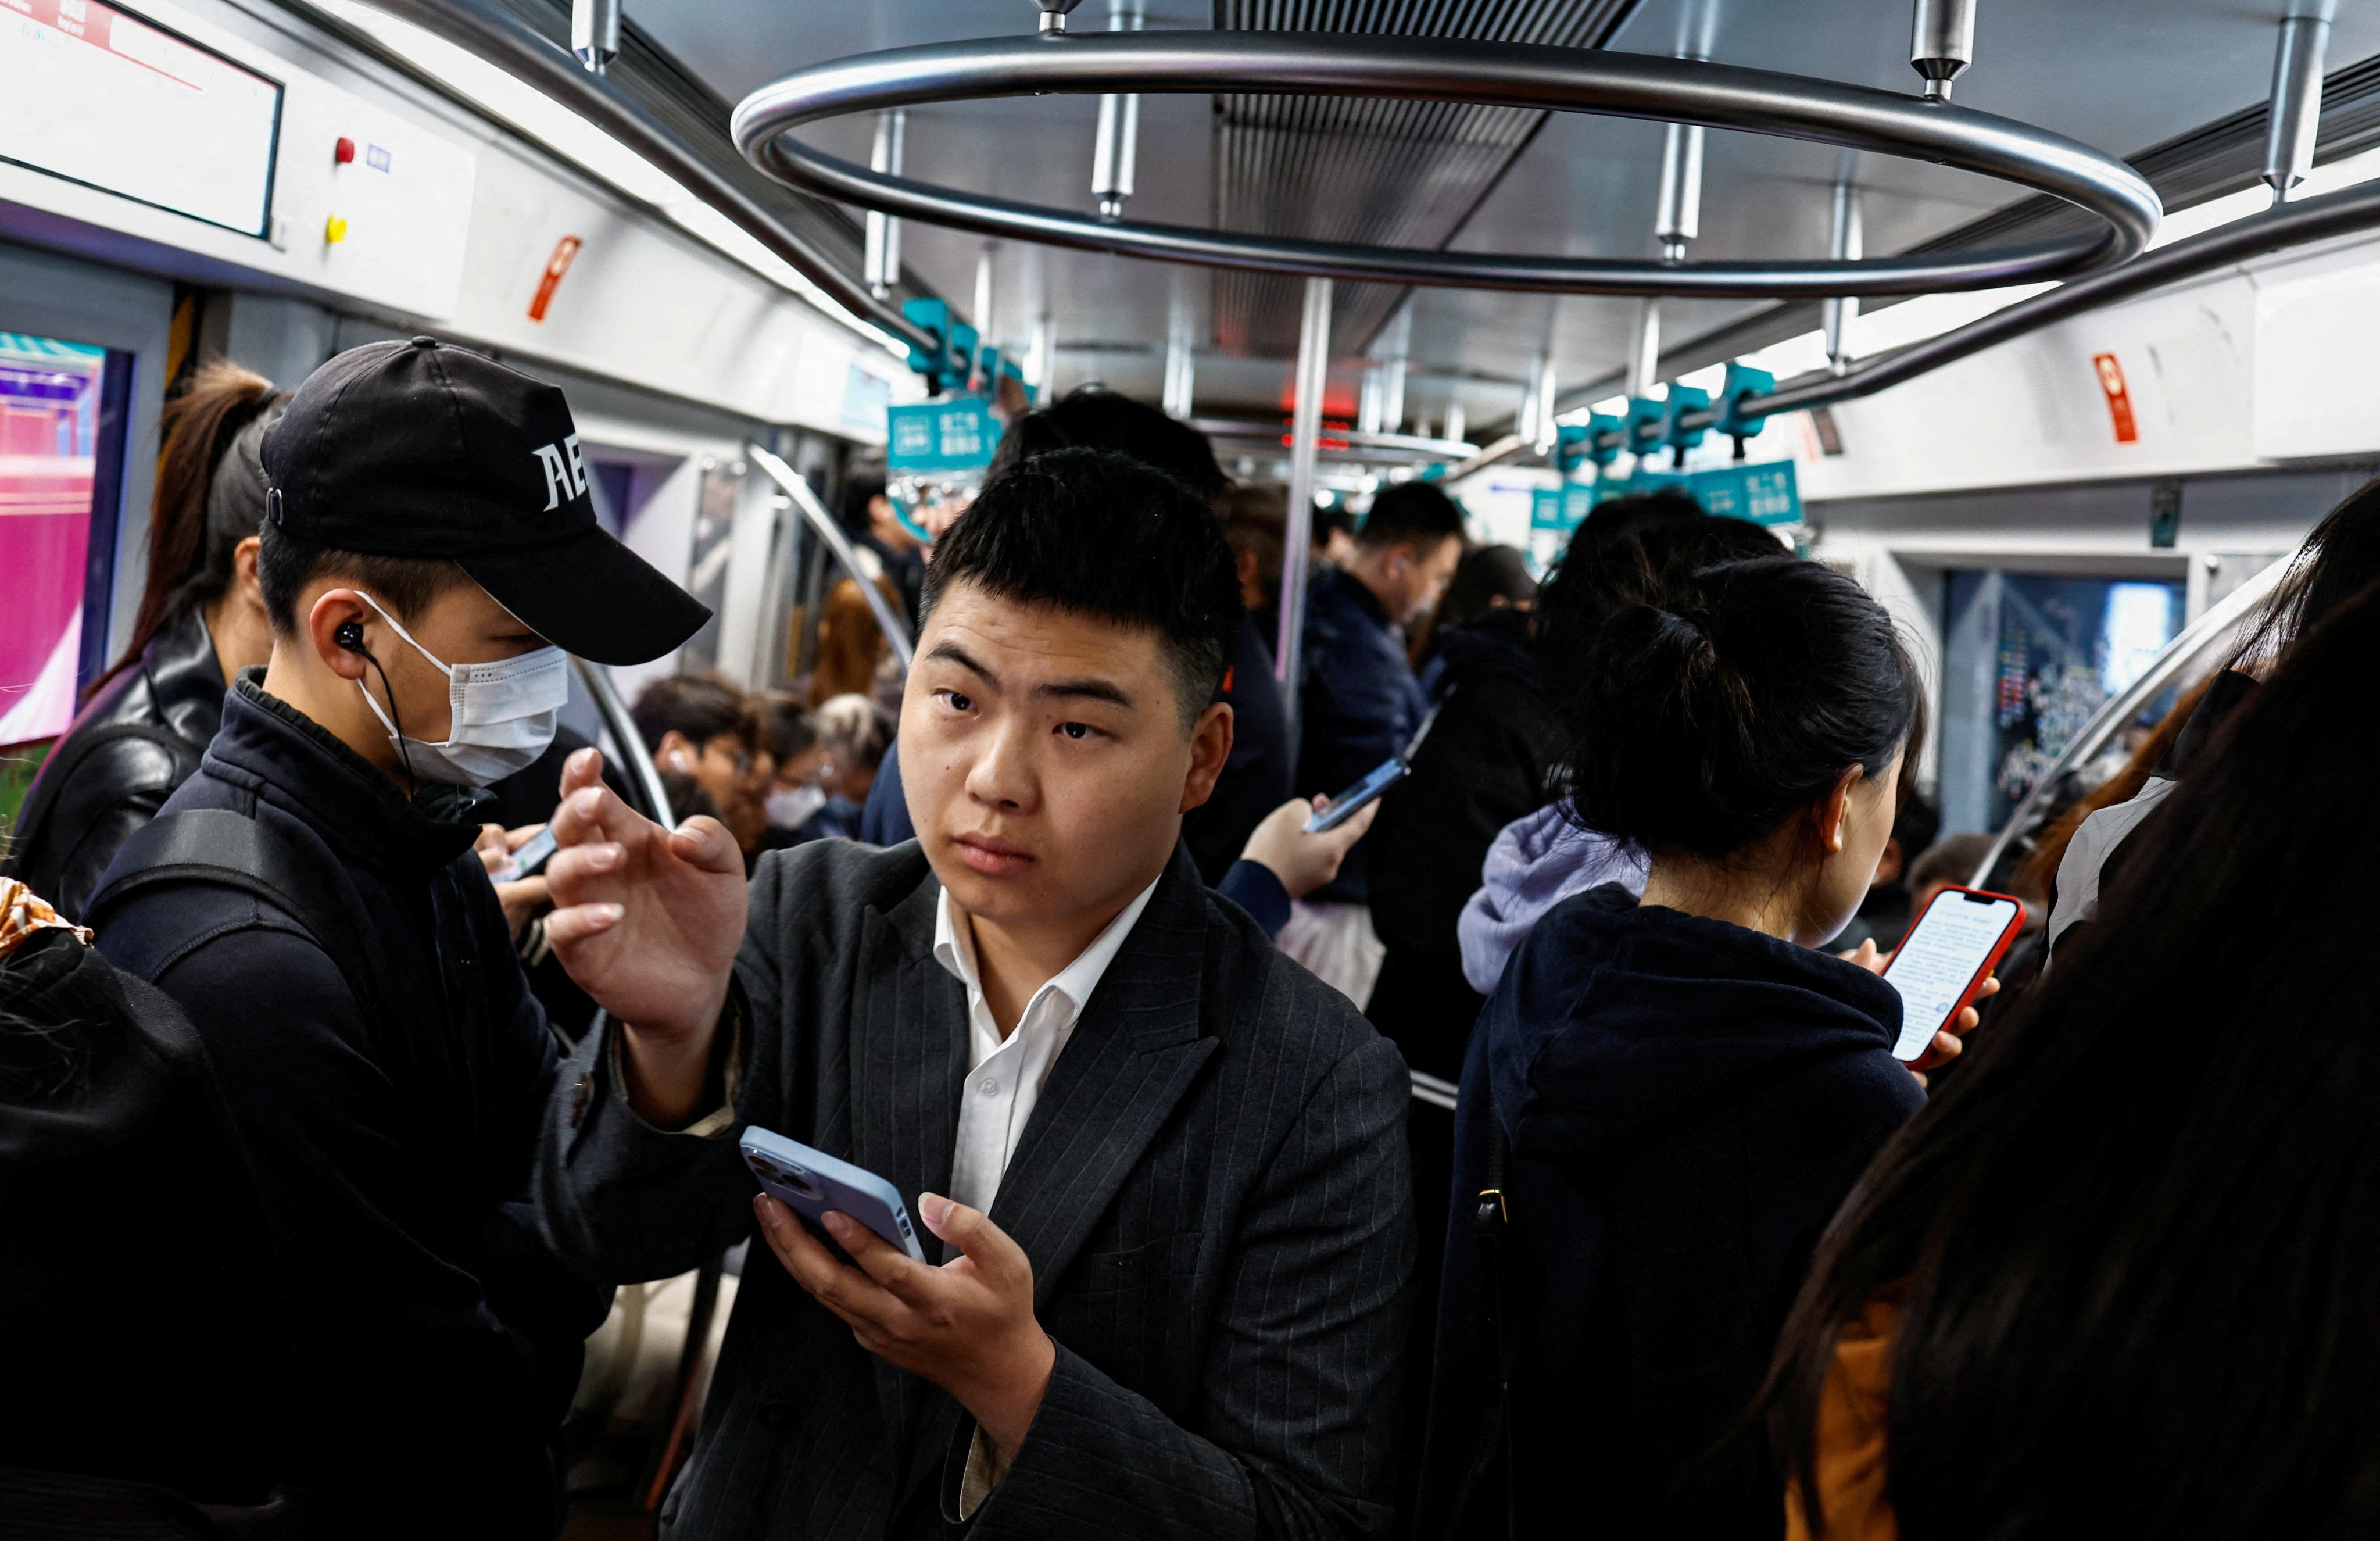 People ride a subway train during morning rush hour in Beijing on April 11. Despite some positive signs of better things to come, consumers, investors and entrepreneurs still lack confidence in the economic outlook. Photo: Reuters